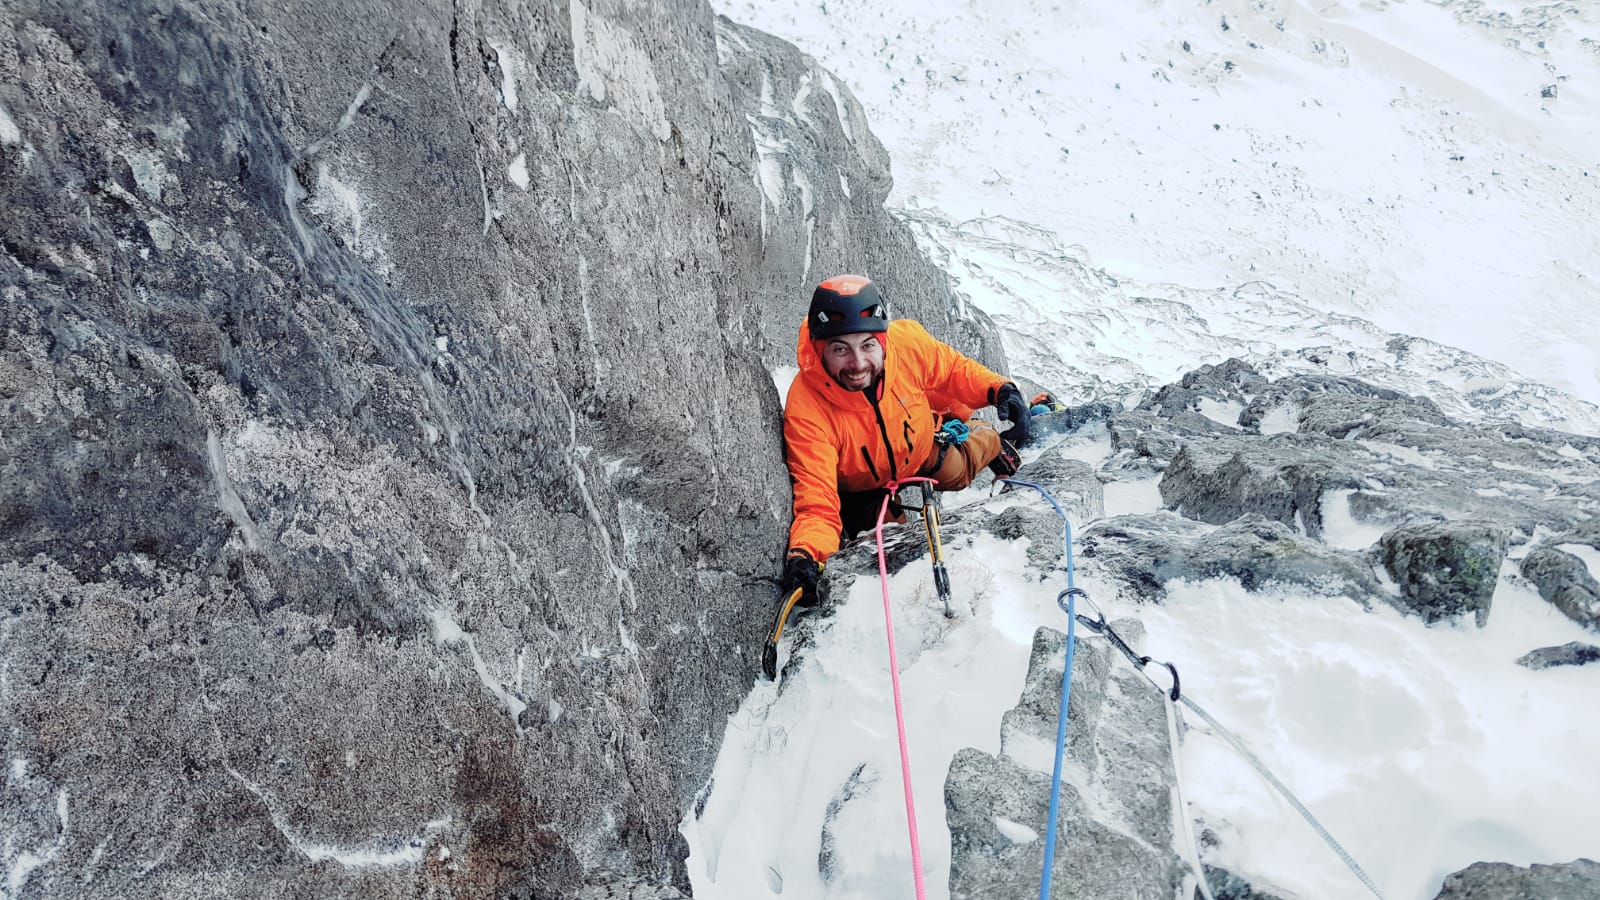 A man climbs using ice axes in the mountains of Scotland.